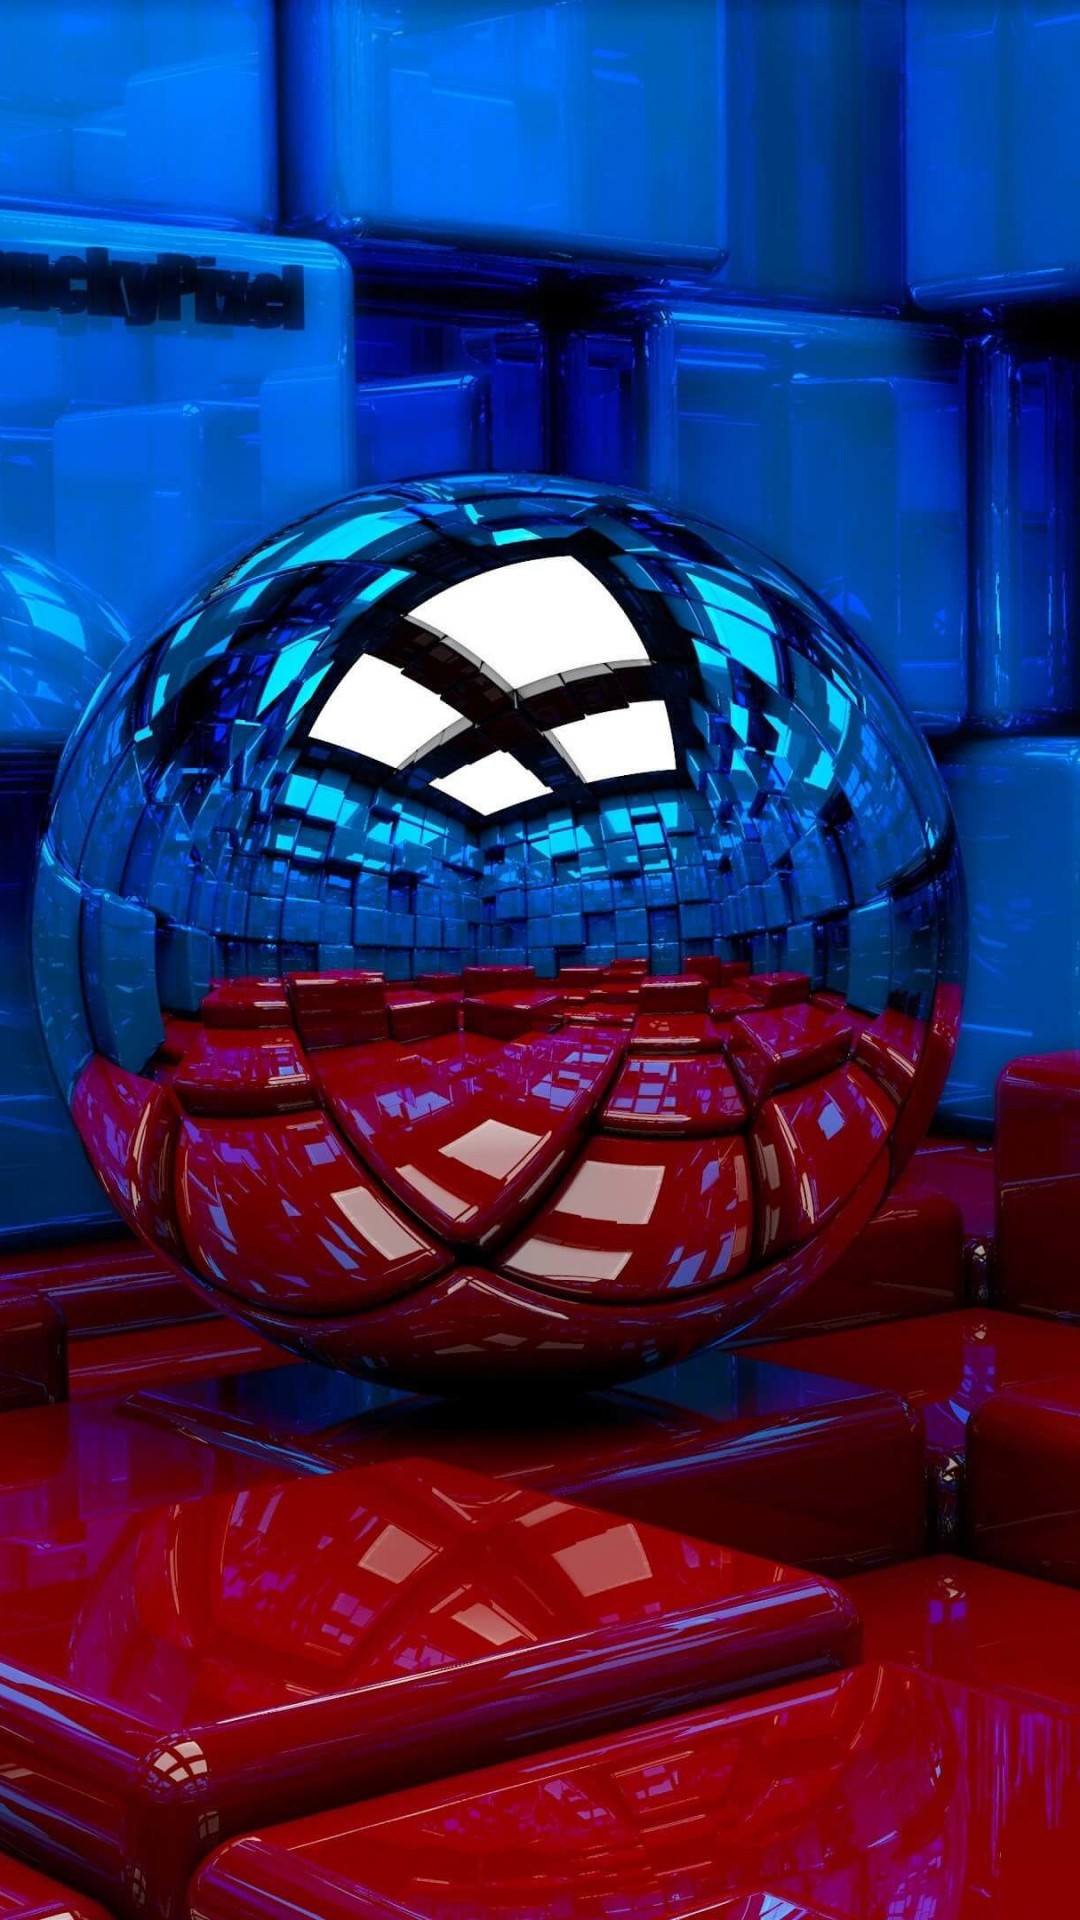 Metallic Sphere Reflecting The Cube Room Wallpaper for SONY Xperia Z2